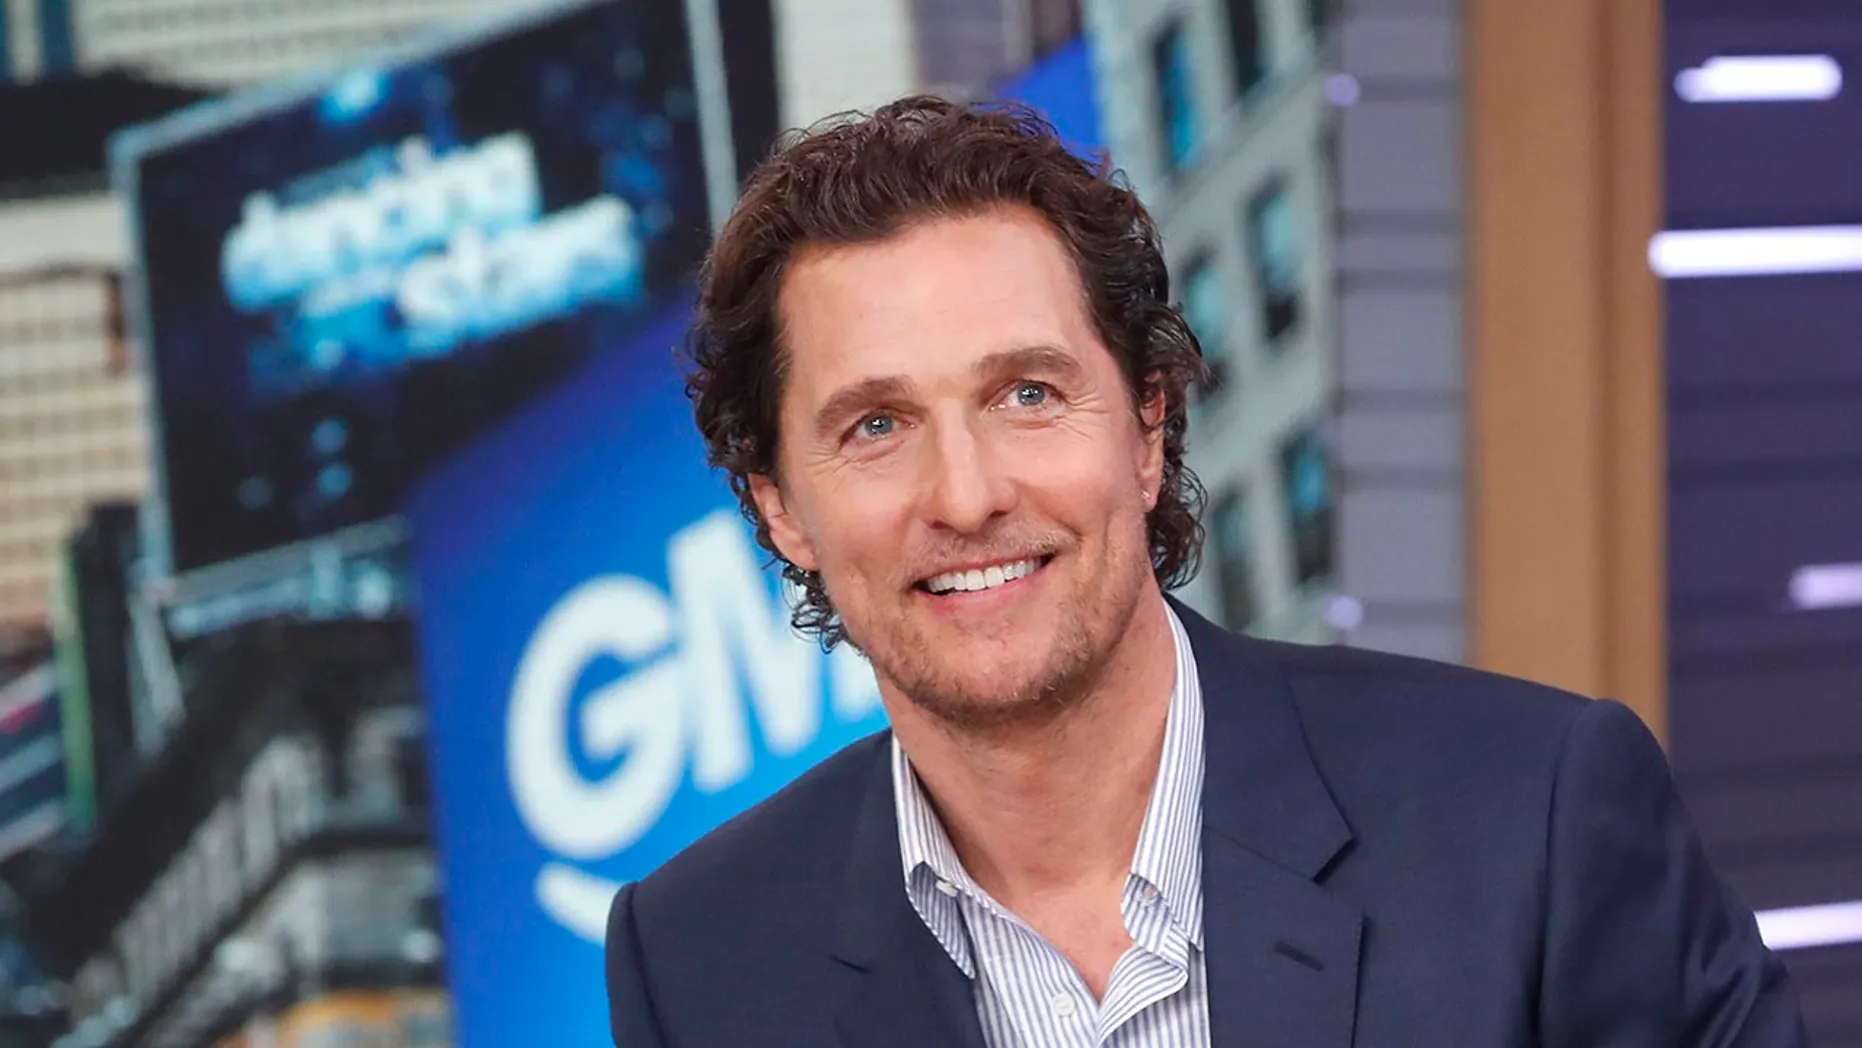 matthew-mcconaughey-asks-for-justice-after-mass-shooting-in-texas